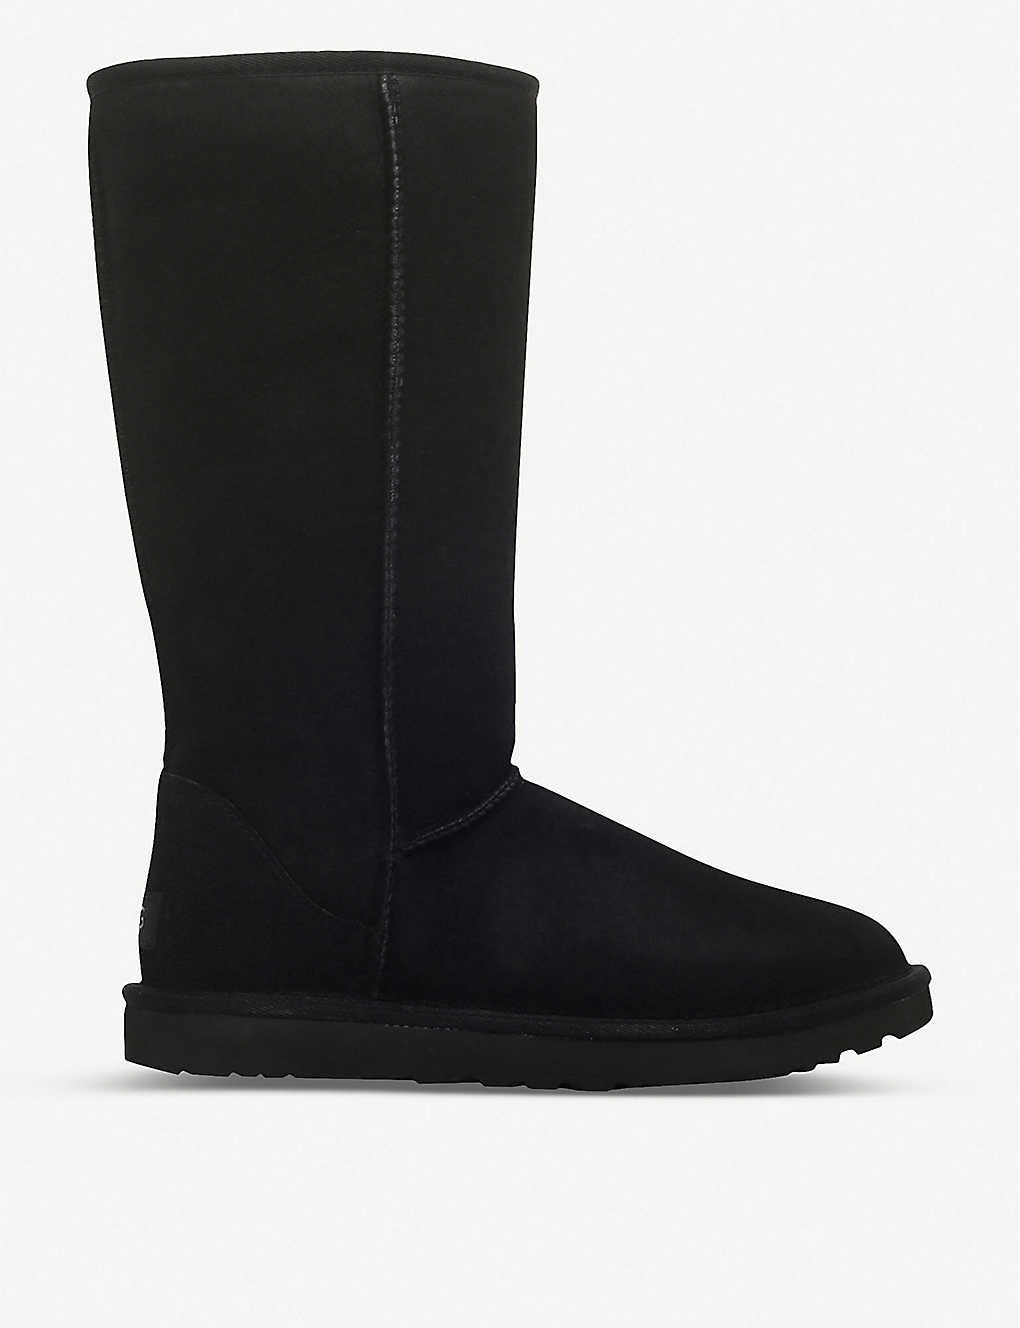 real ugg boots on sale uk